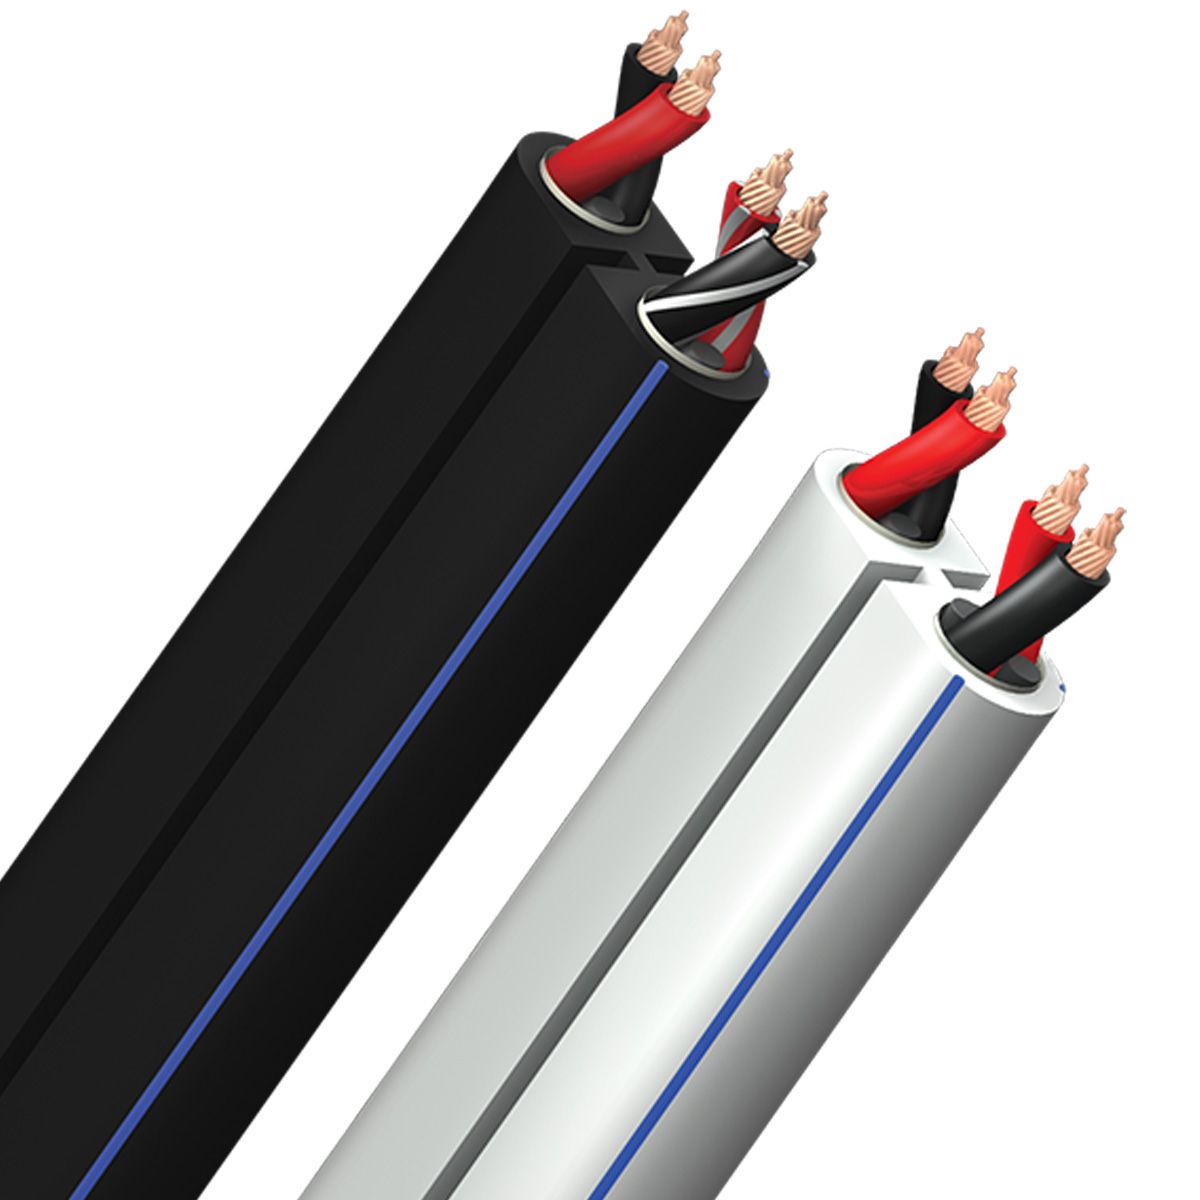 speaker cable length